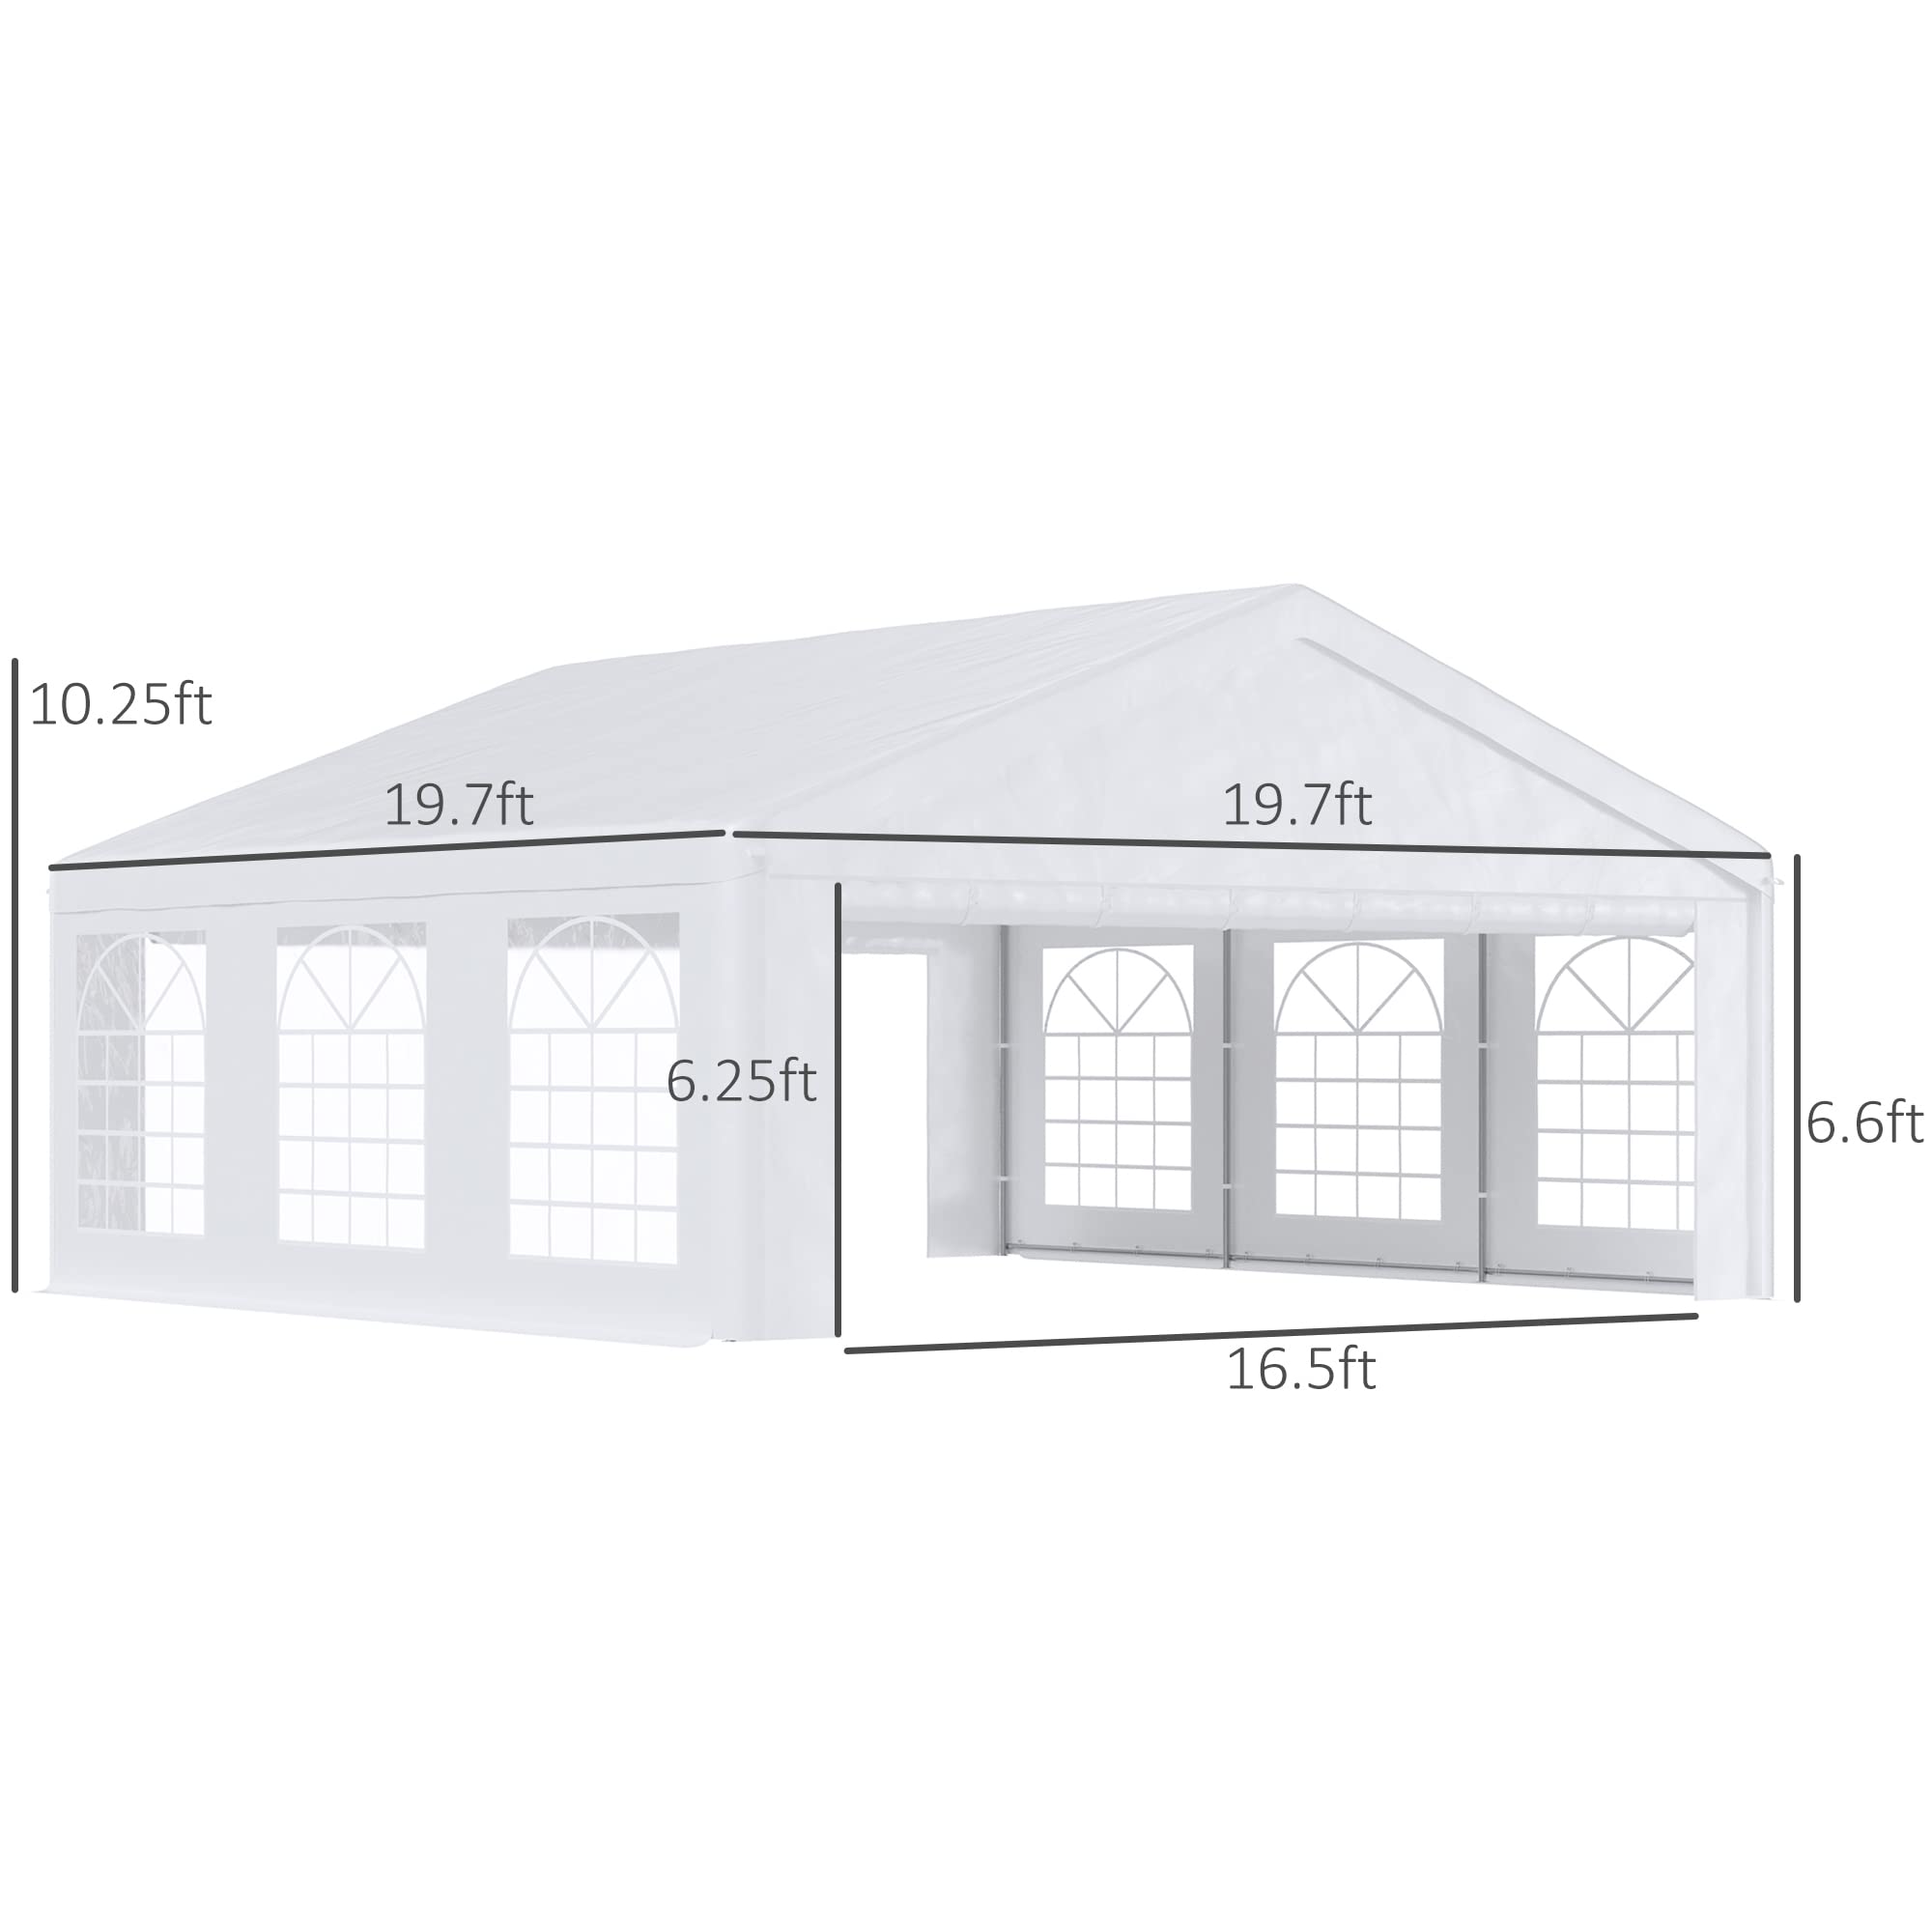 Outsunny 20' x 20' Heavy Duty Party Tent & Carport with Removable Sidewalls and Double Doors, Large Canopy Tent, Sun Shade Shelter, for Parties, Wedding, Outdoor Events, BBQ, White